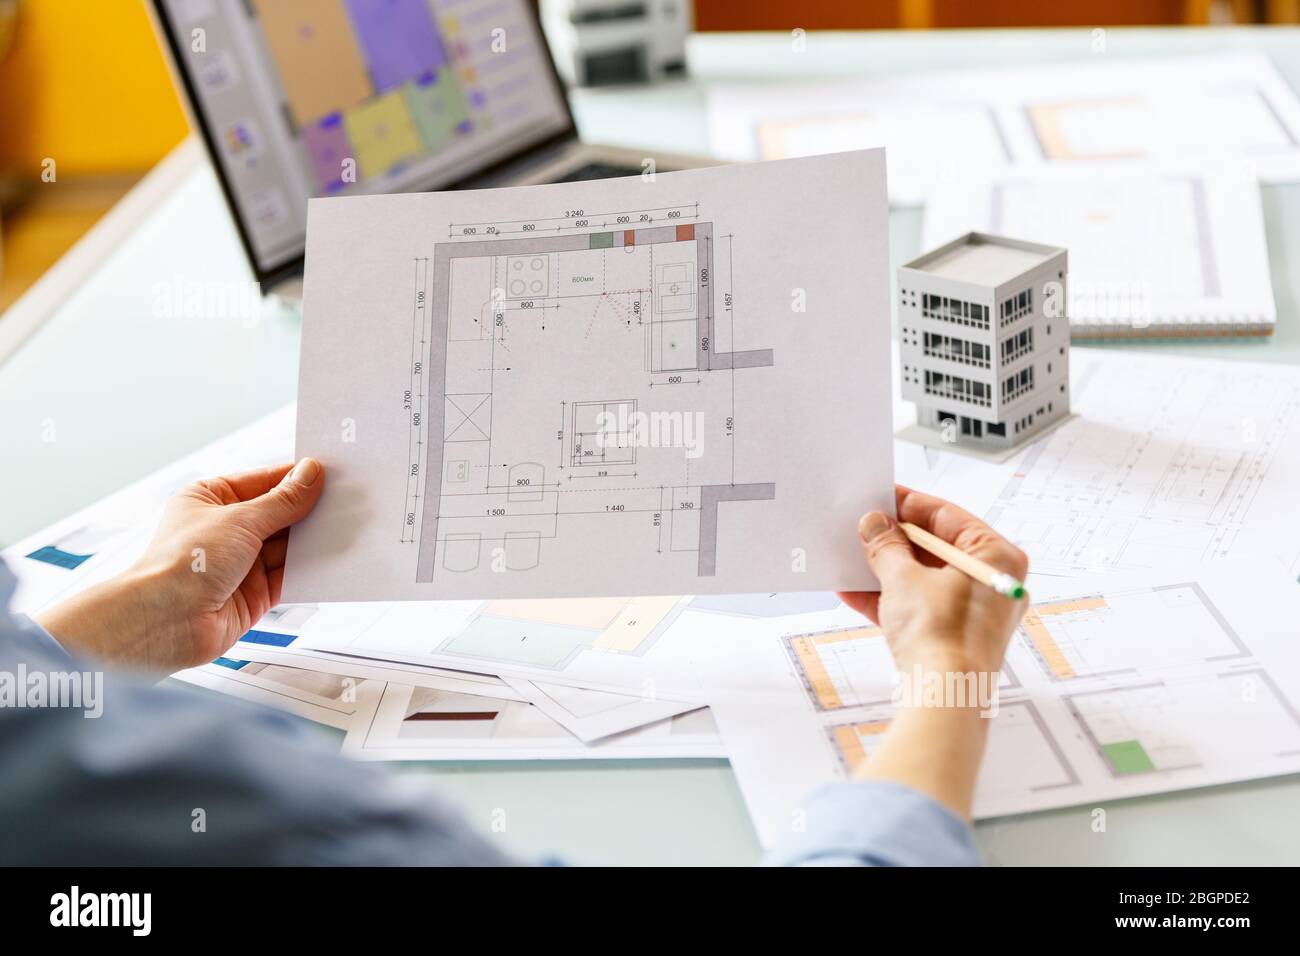 Interior designer working with an apartment plans in a studio, with blueprints and laptop on a table. Architectural desigh bureau working concept Stock Photo